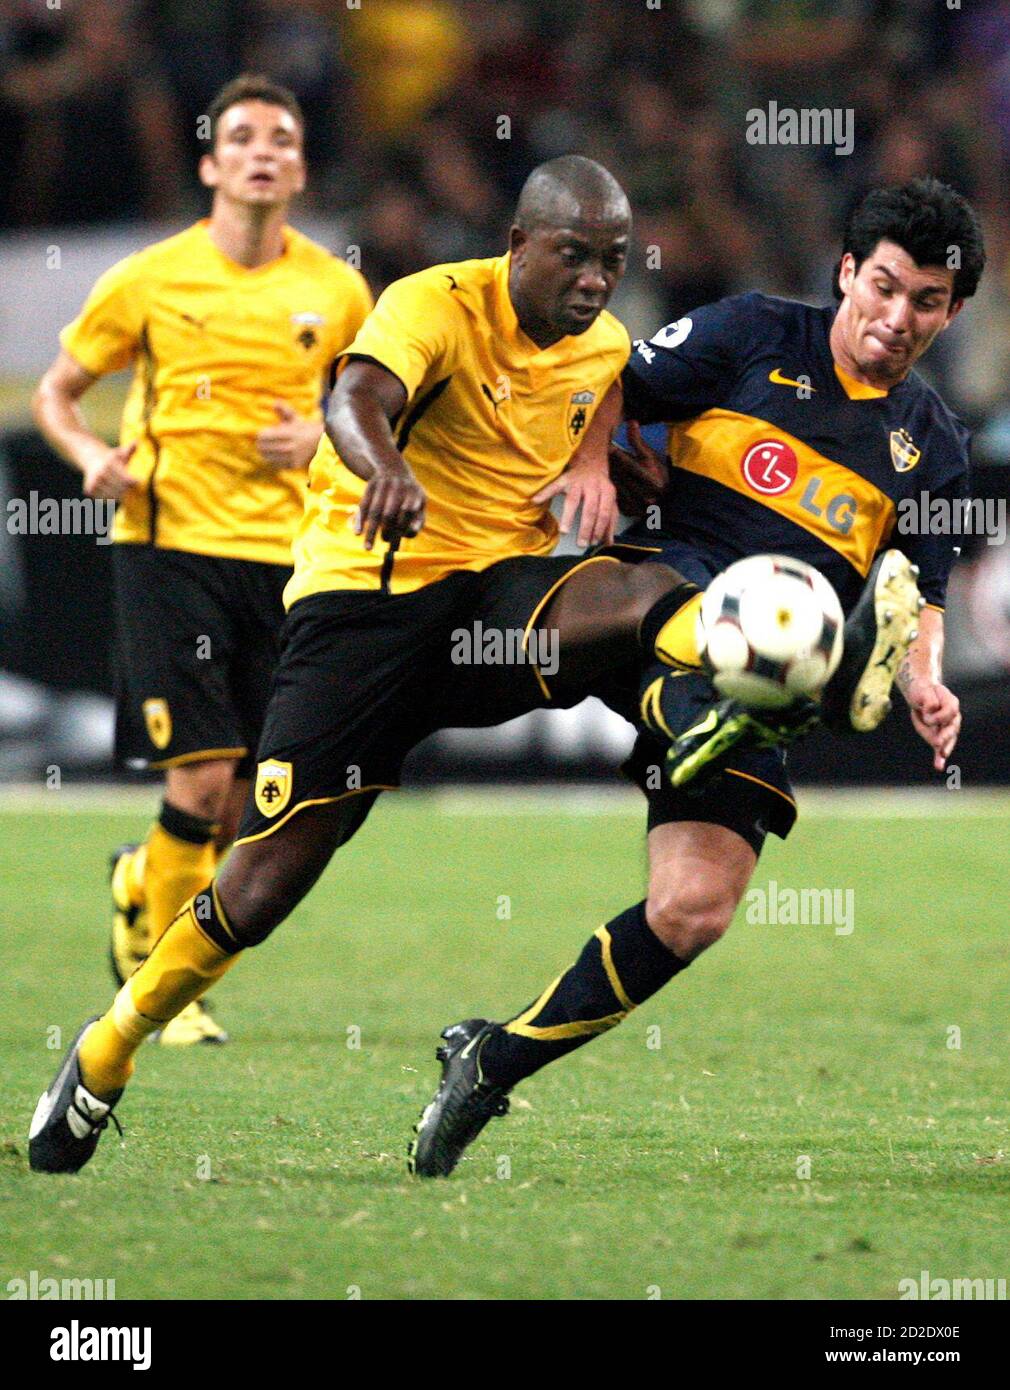 Boca Juniors' Gary Medel (R) struggles for the ball against AEK Athens'  Tamadani Nsaliwa during a friendly soccer match in Athens August 8, 2009.  REUTERS/Yiorgos Karahalis (GREECE SPORT SOCCER Stock Photo - Alamy